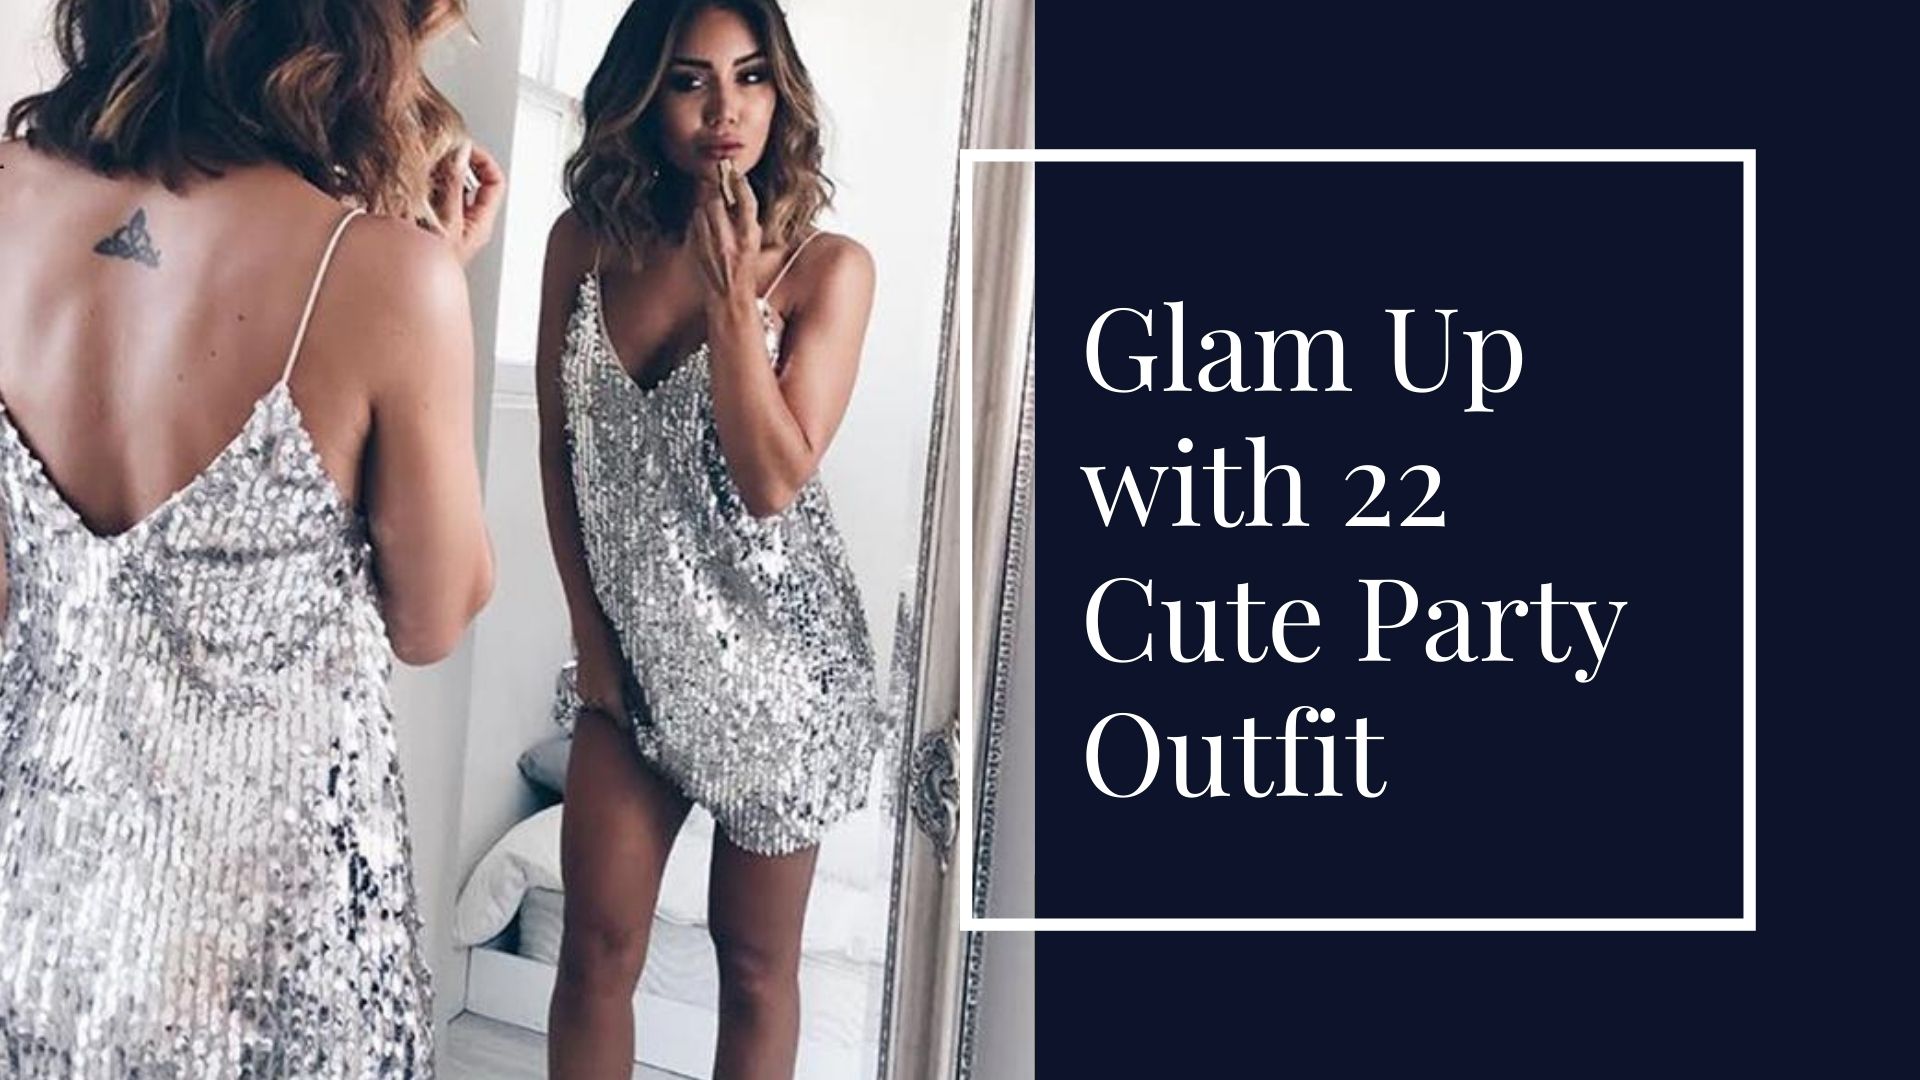 You are currently viewing Glam Up with 22 Cute Party Outfit